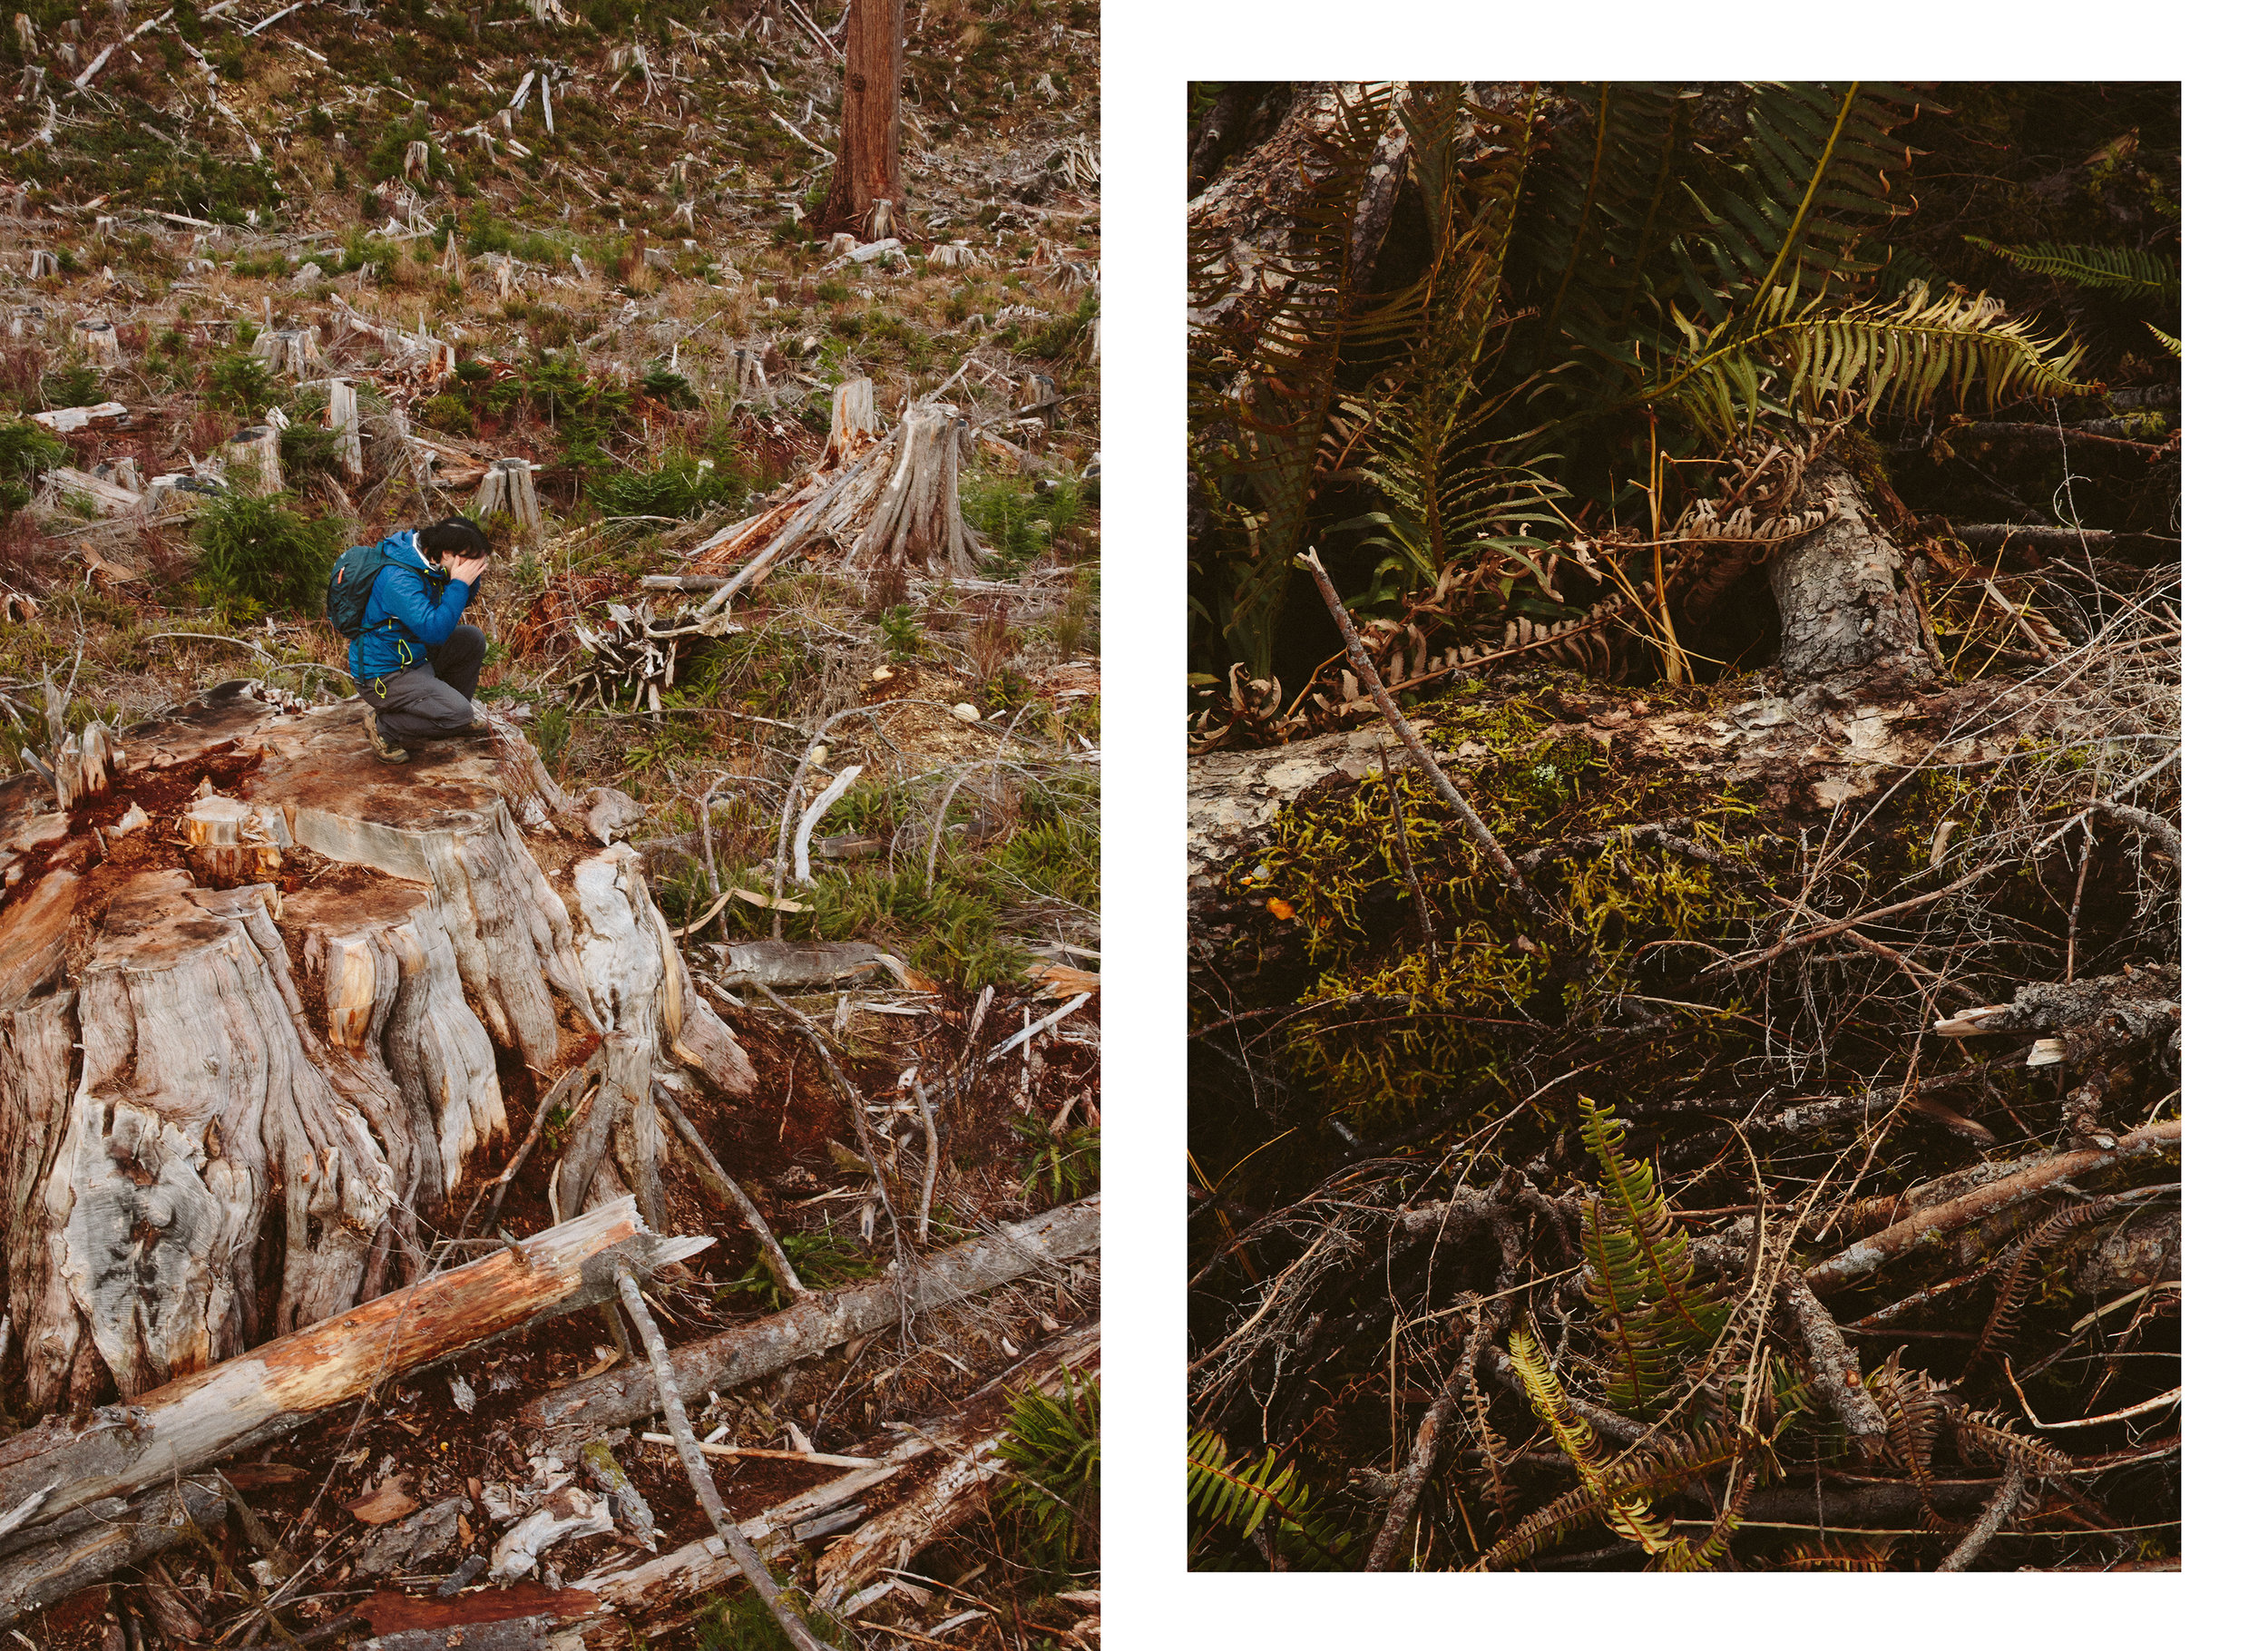 11-Vancouver-Island-Old-Growth-Forests-Logging-Port-Renfrew-Big-Lonely-Doug-Clearcut-Edit.jpg